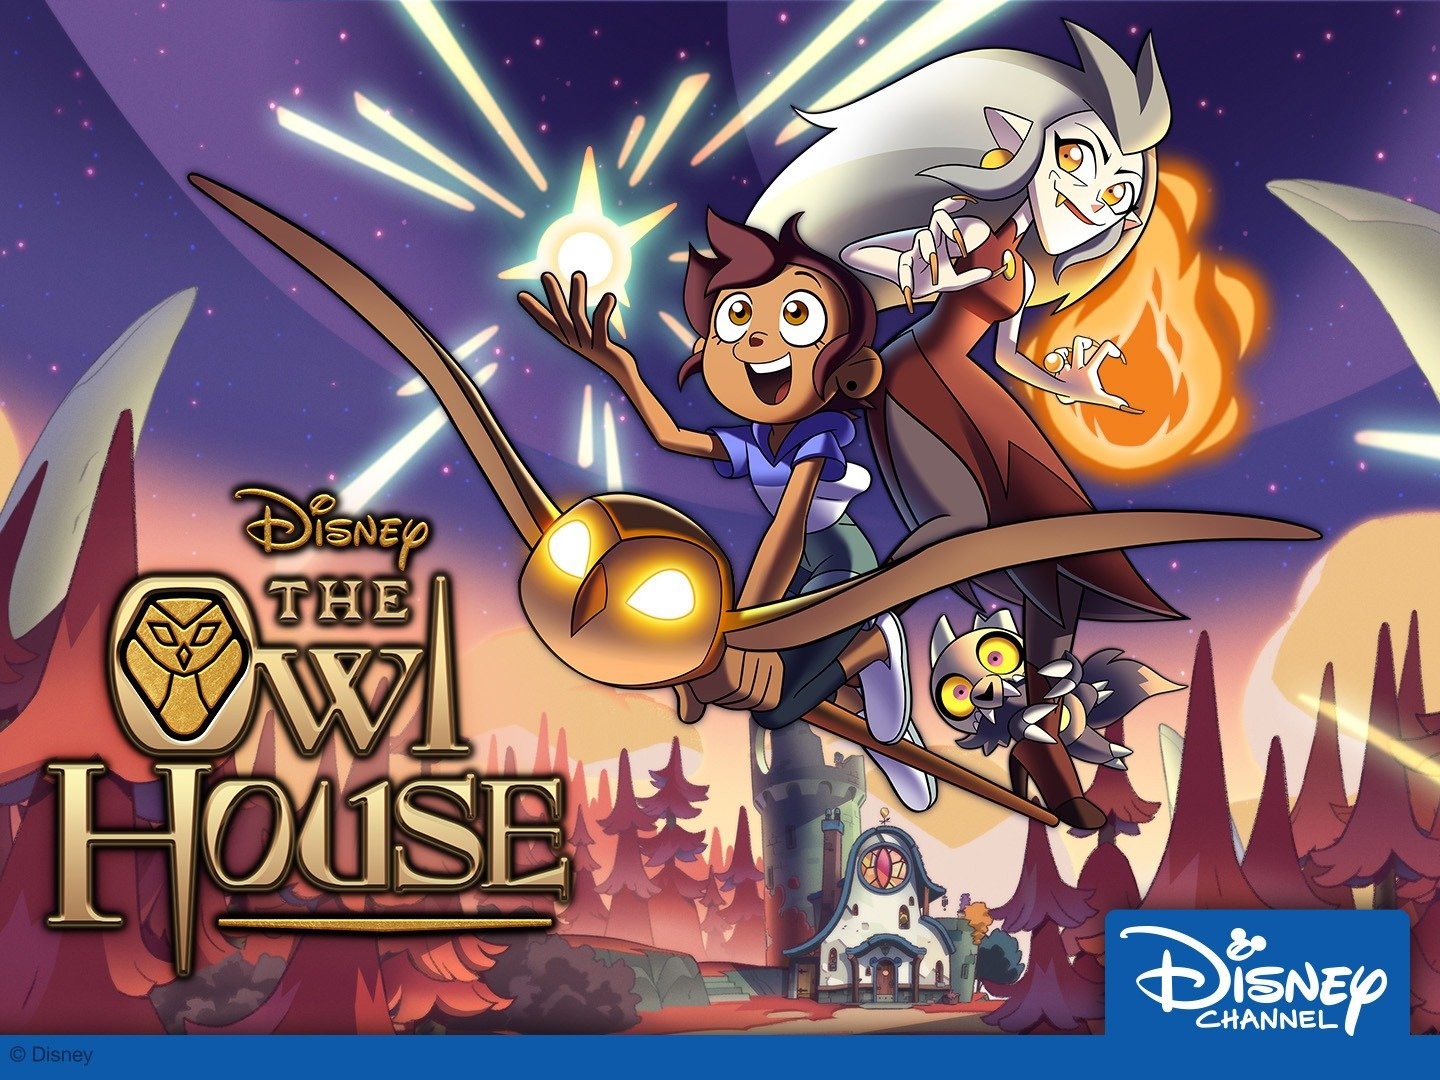 The Owl House - Where to Watch and Stream - TV Guide